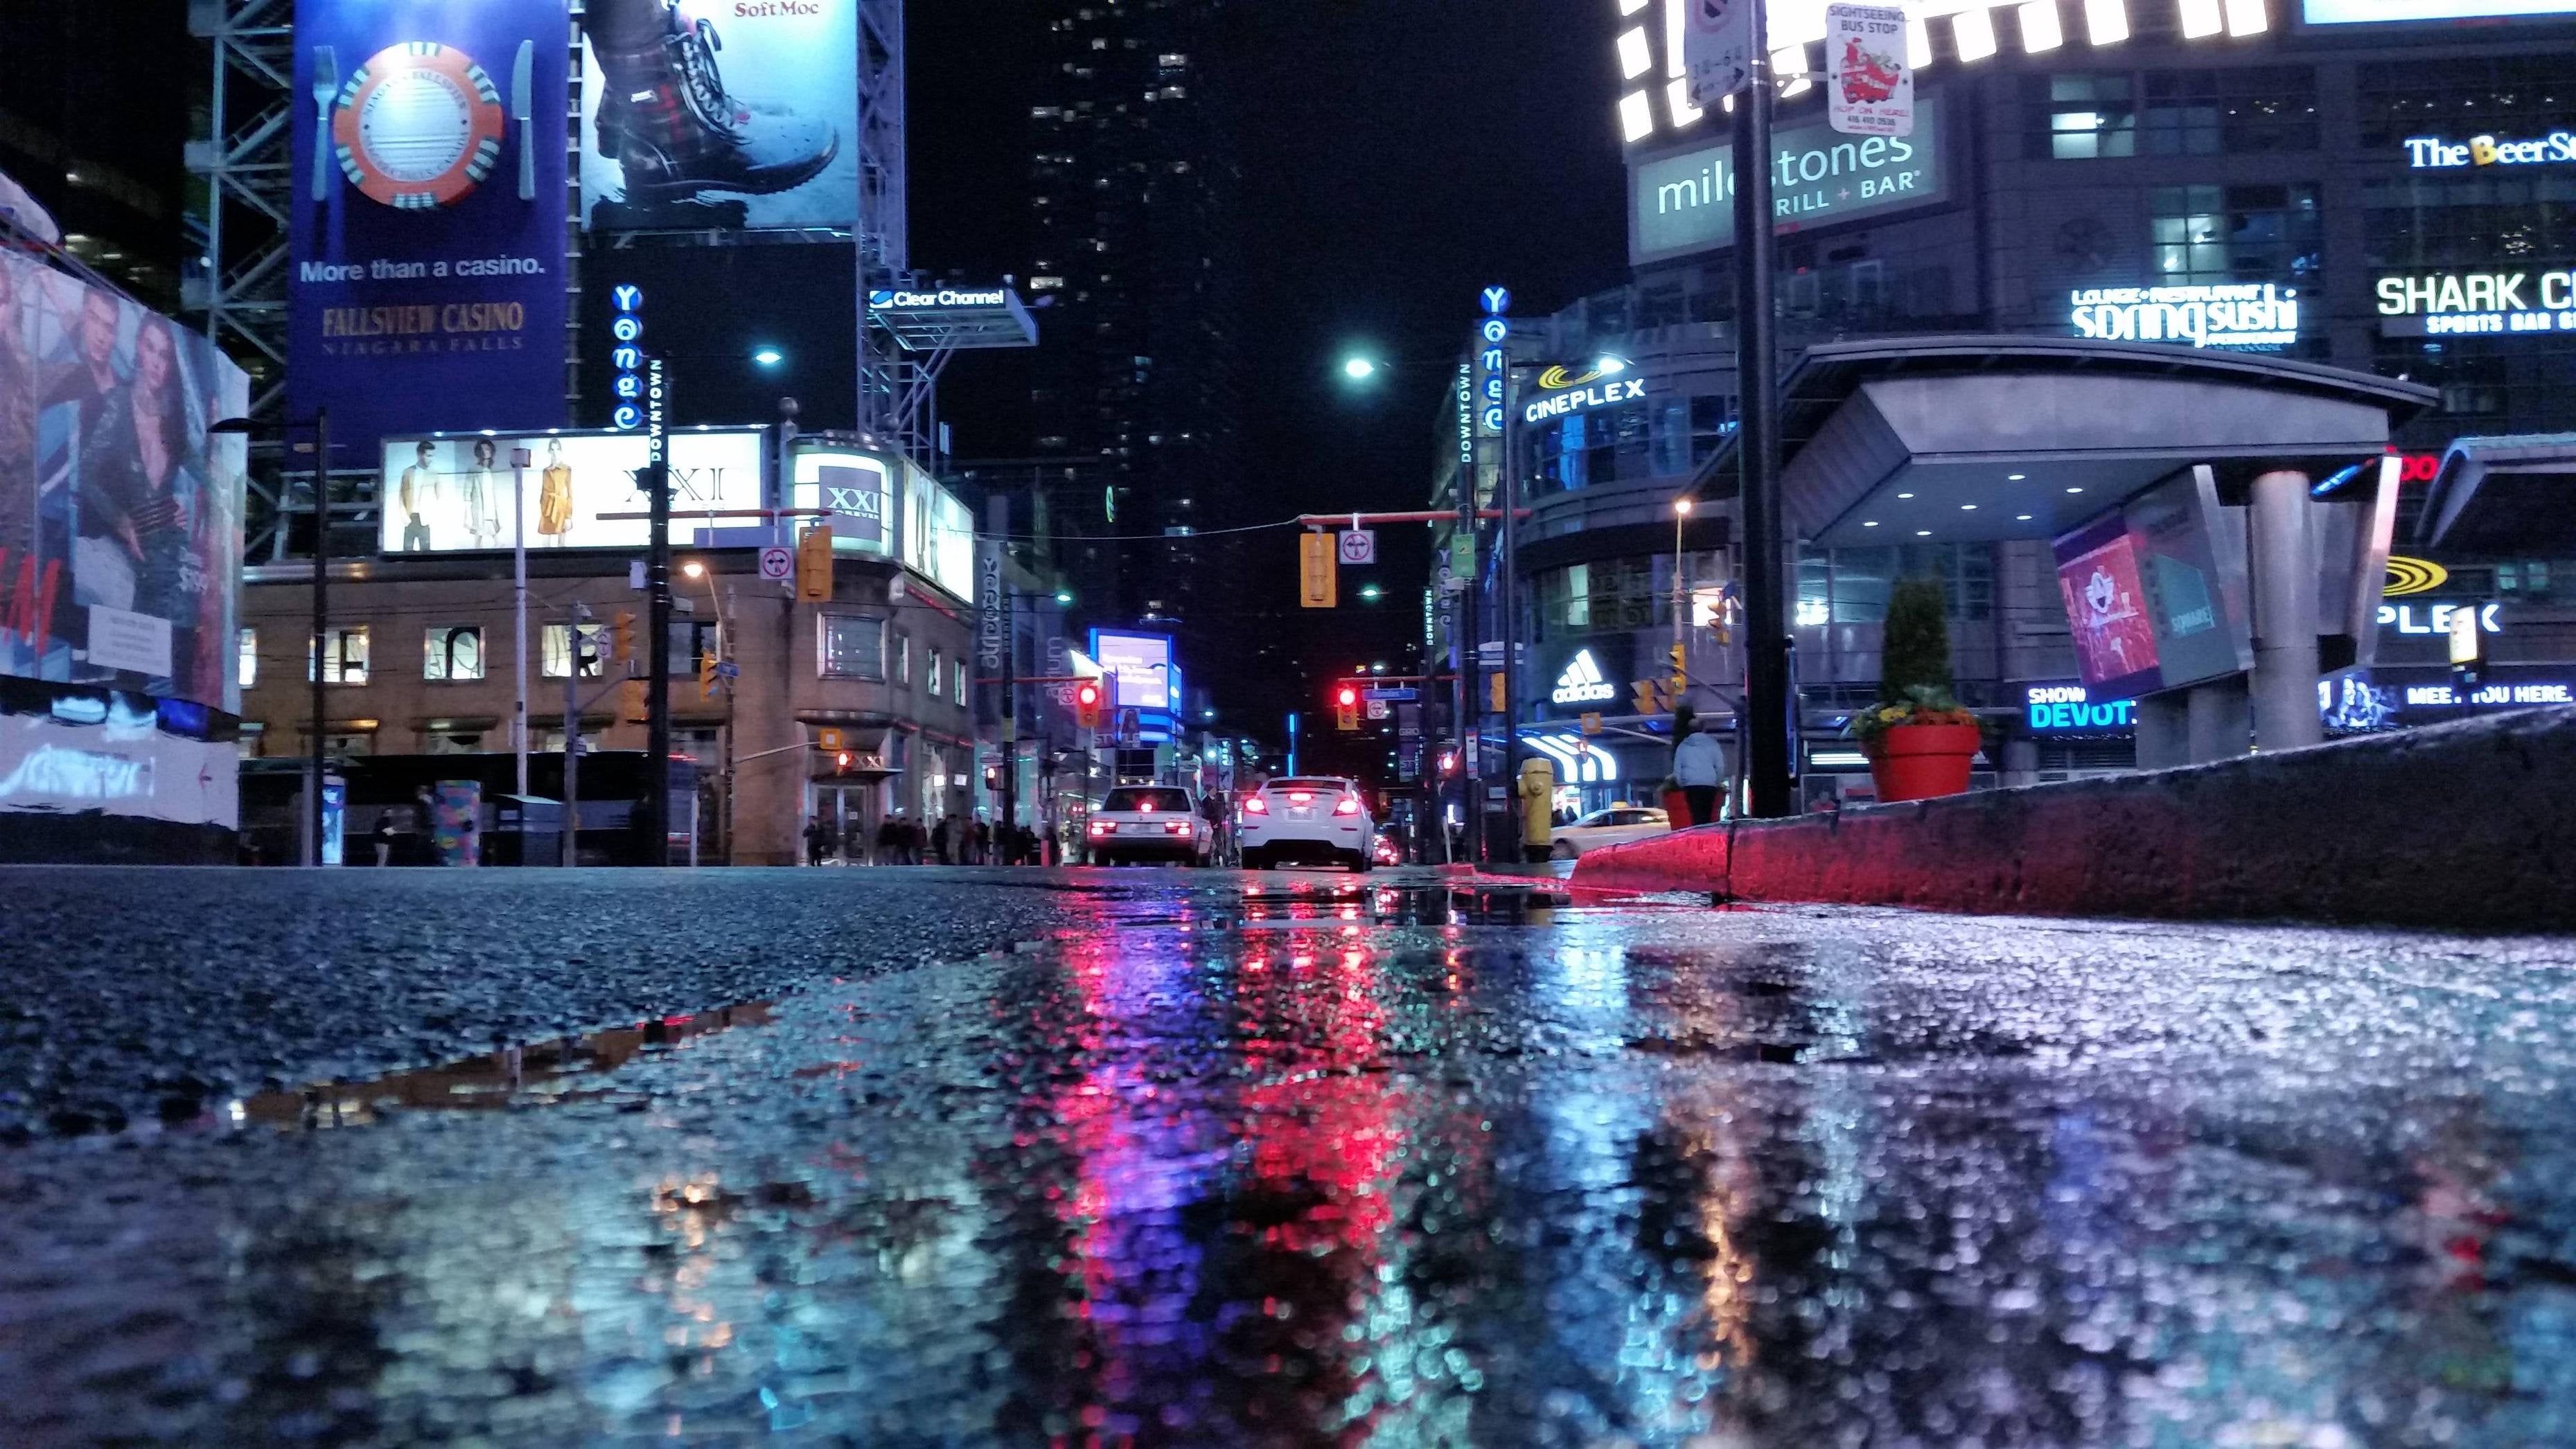 Rainy Day In Ontario(X Post From R Wallpaper)